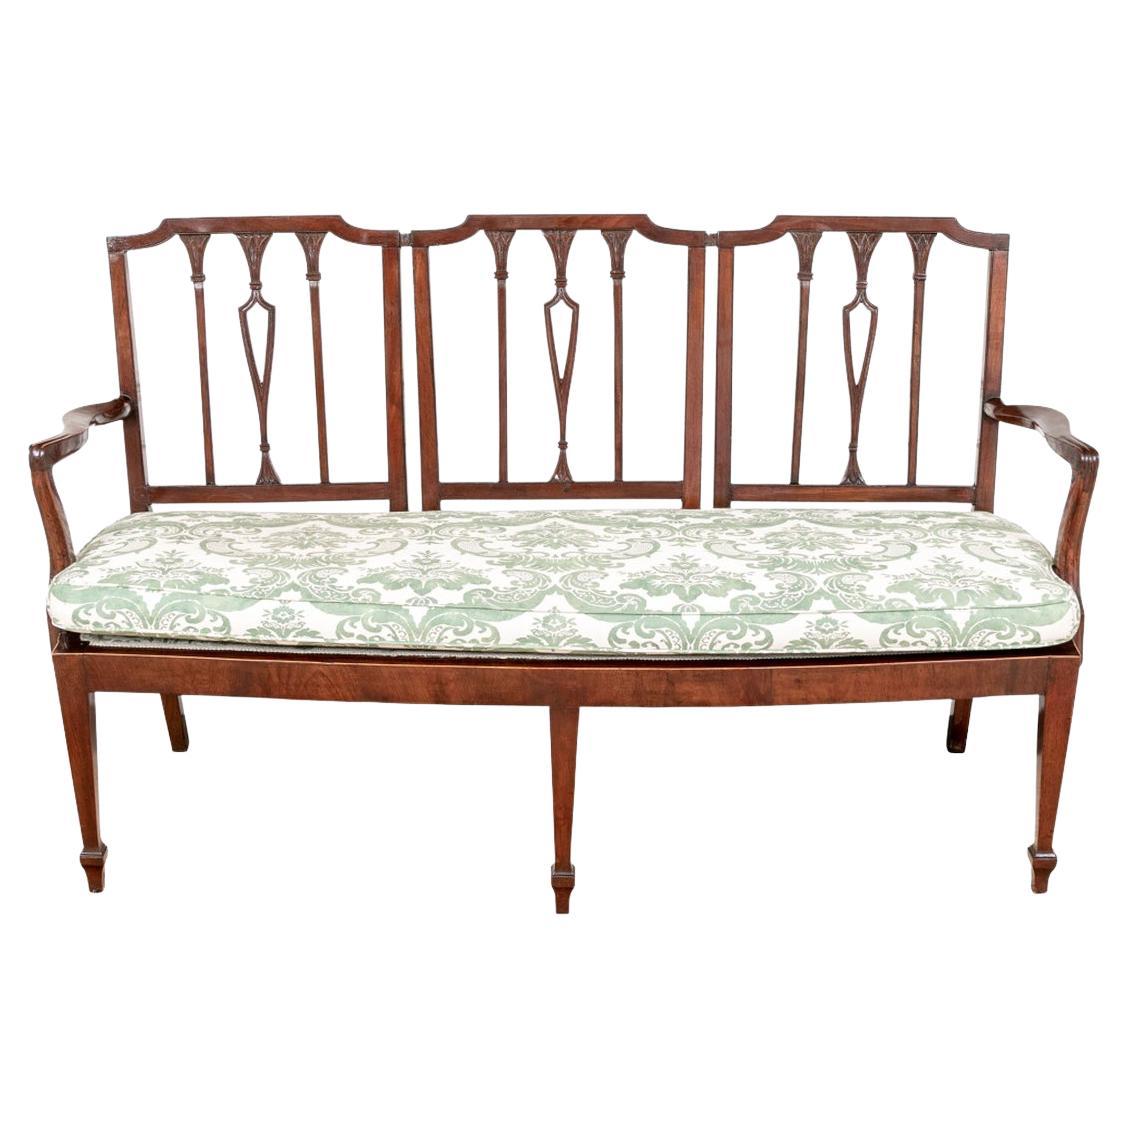 Antique Sheraton Style Mahogany Settee with Brunschwig & Fils Fabric